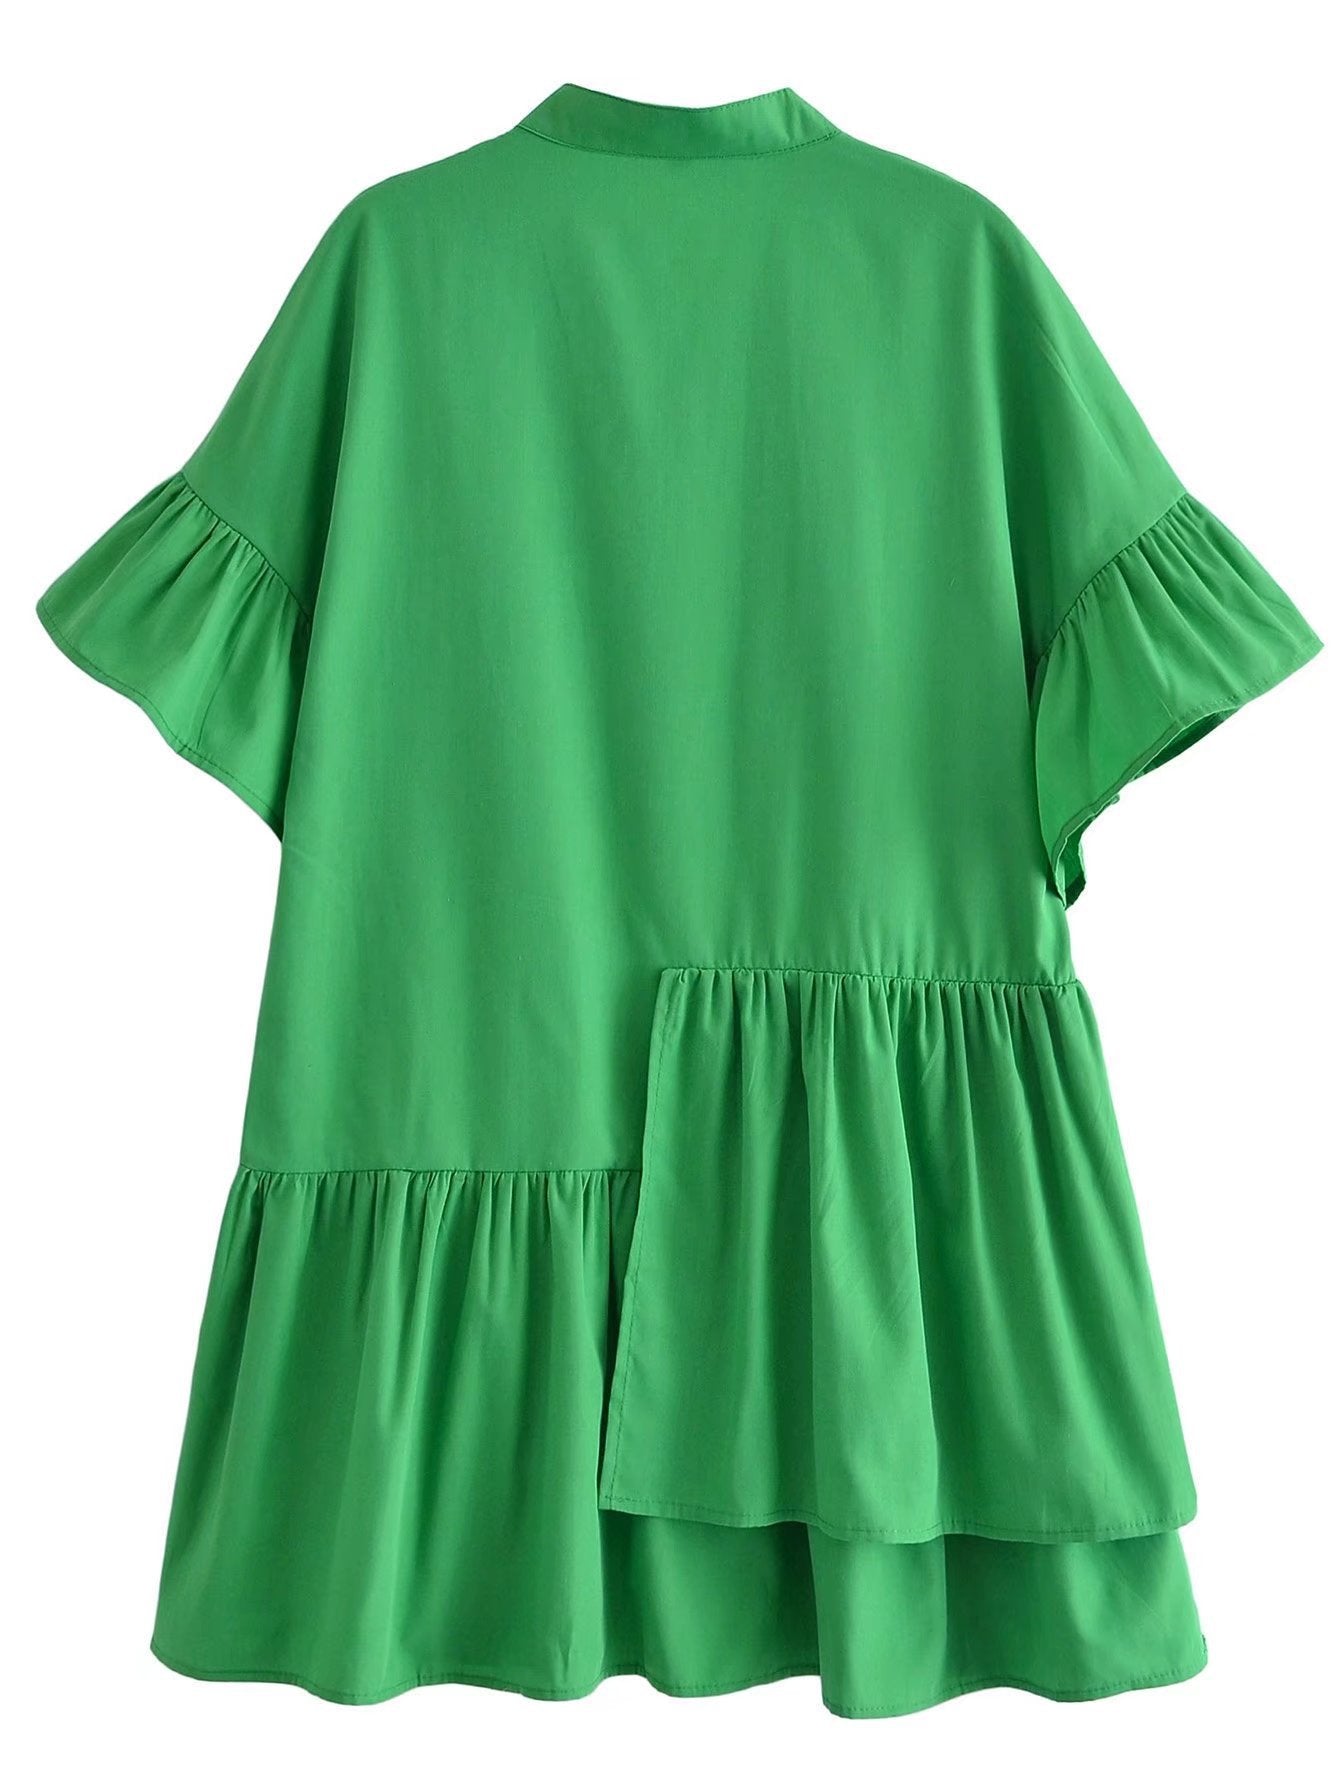 Women's New Solid Green Layered Dress